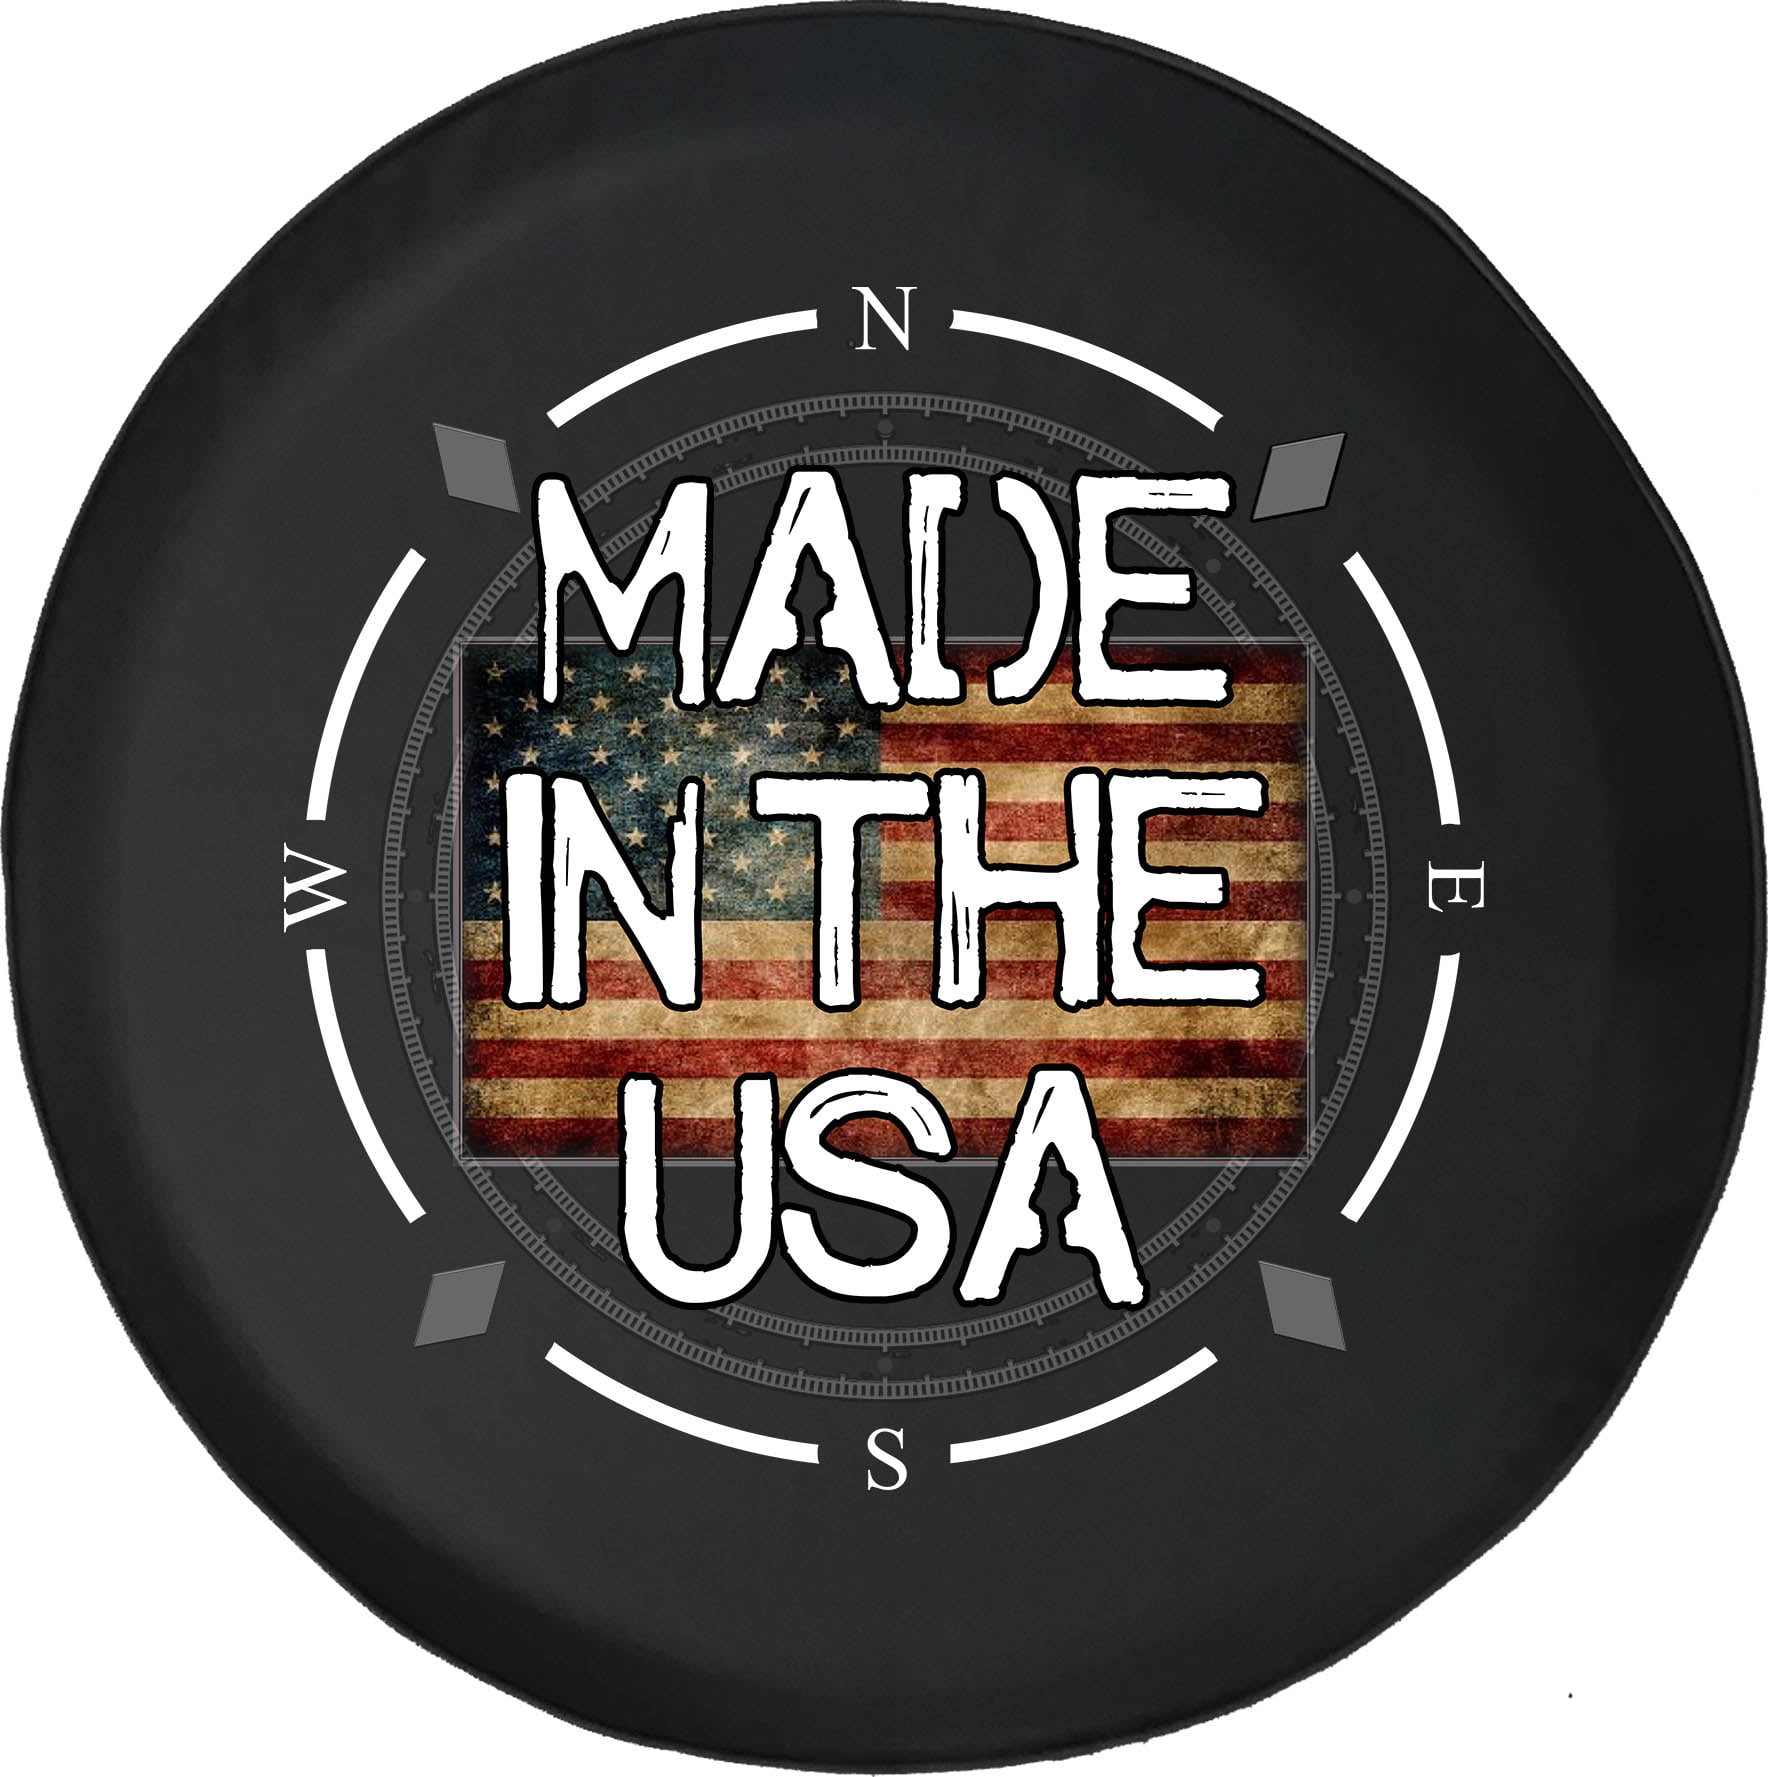 NELife Tire Cover Artiswall American Flag Reclaimed Wood Polyester Wheel Tire Cover Potable Universal Wheel Covers Waterproof Tire Cover Fit for Trailer RV SUV Truck Trailer Accessories 14-17 in 